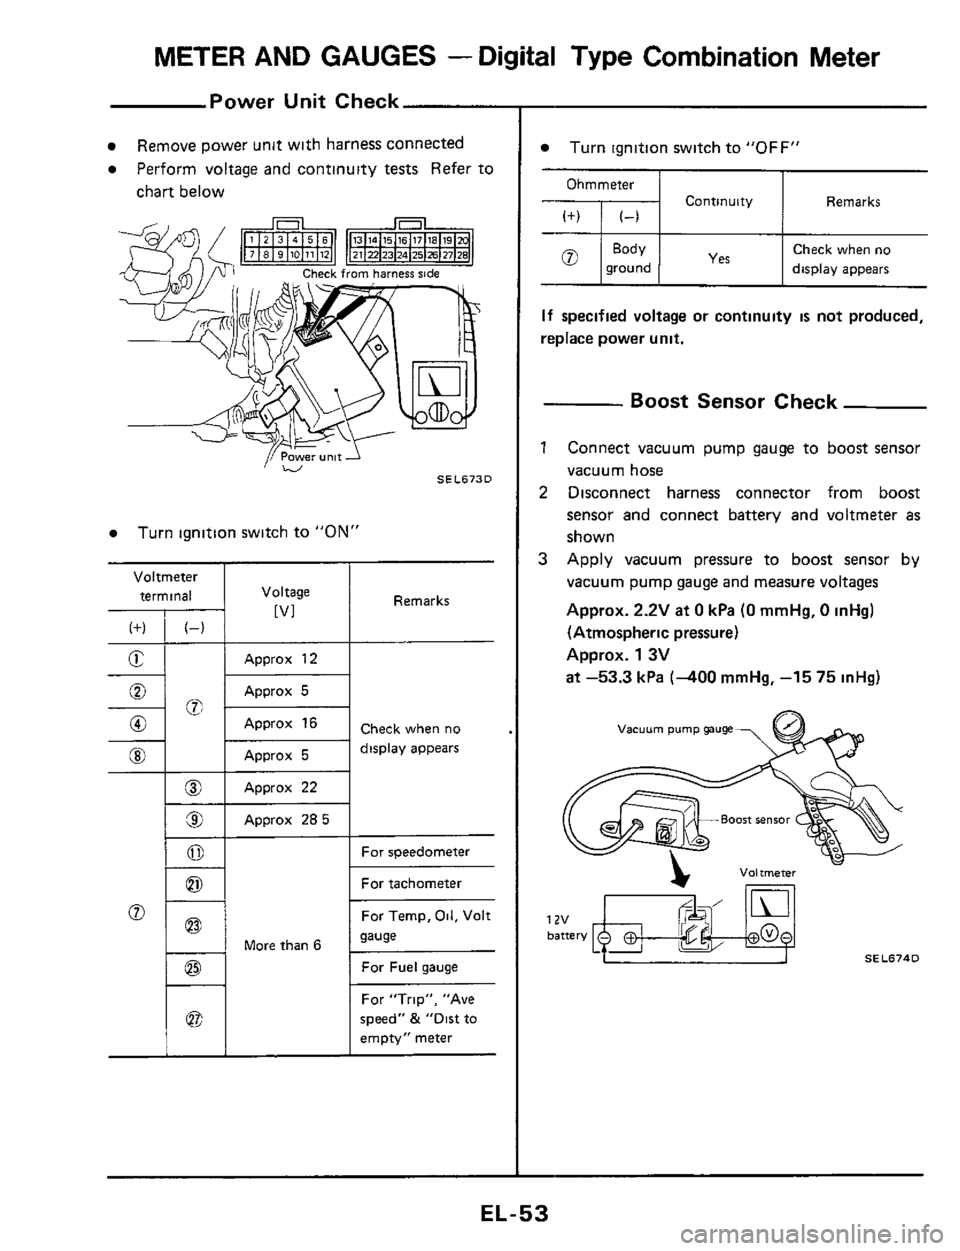 NISSAN 300ZX 1984 Z31 Electrical System Workshop Manual METER AND GAUGES - Digital Type Combination Meter 
Power Unit Check 
Voltmeter 
terminal 
(f) (-) 
E - 
-%; 0 
0 
@I 
__ 
@ 
9 
0 
0 
Remove  power unit with  harness  connected 
Perform  voltage and 